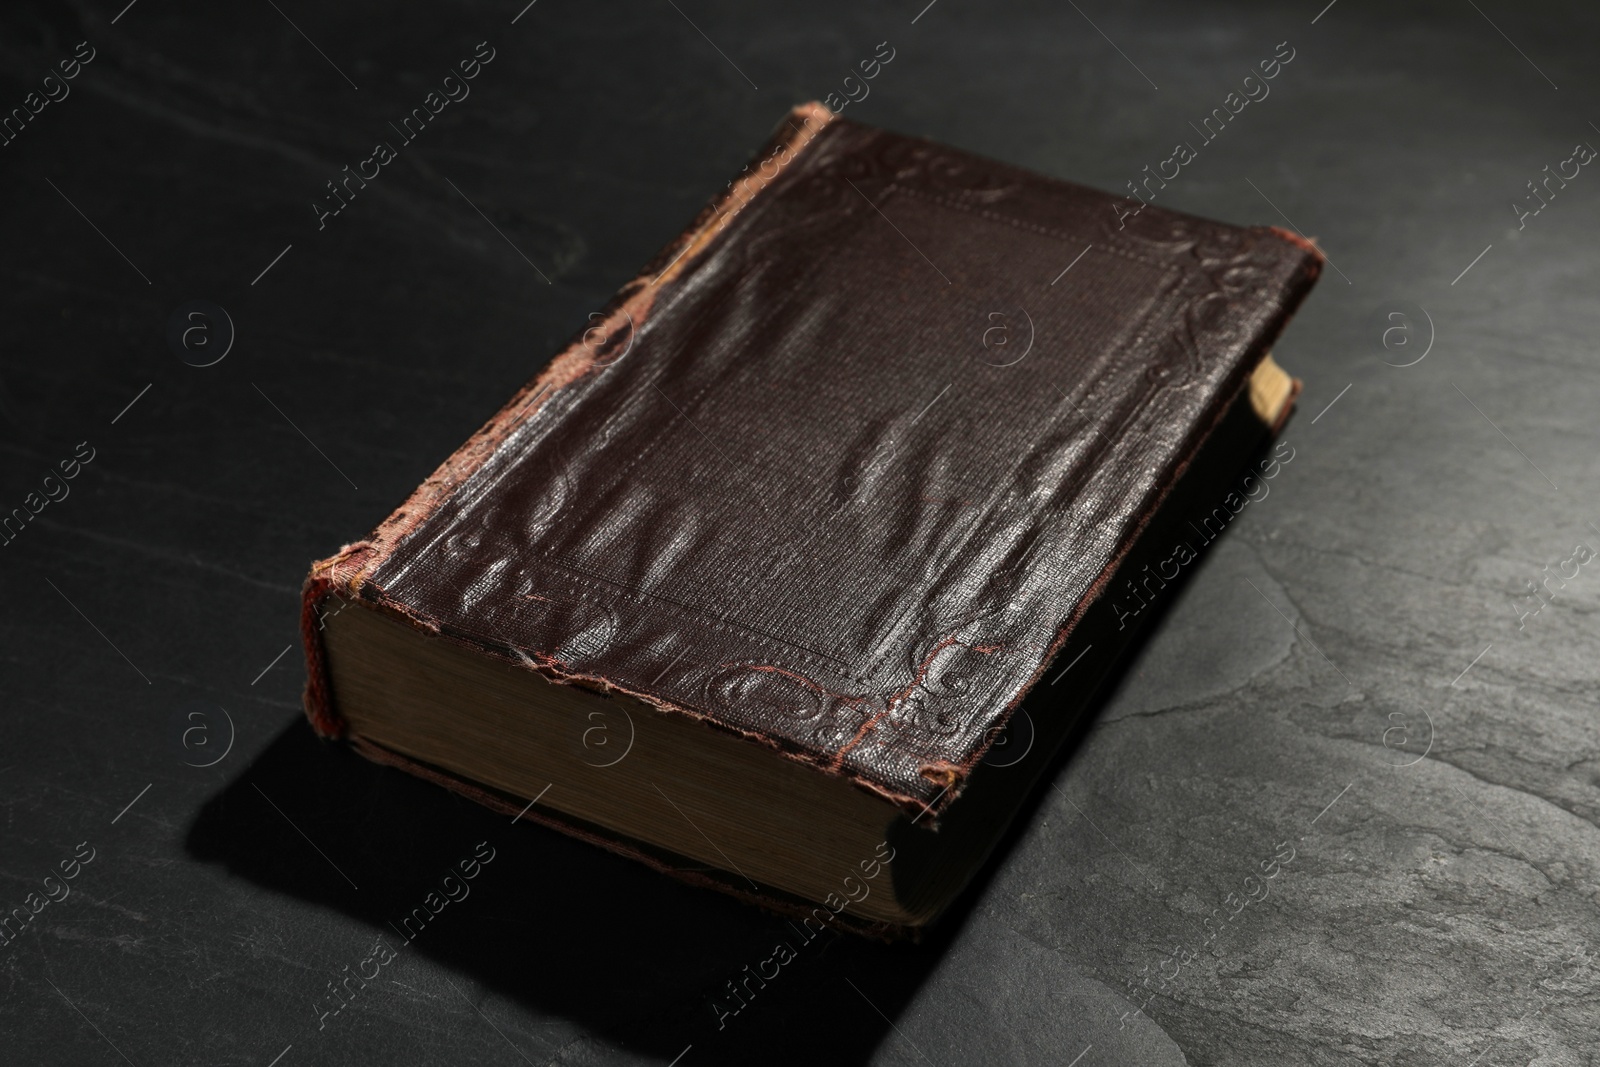 Photo of One old hardcover book on black textured table